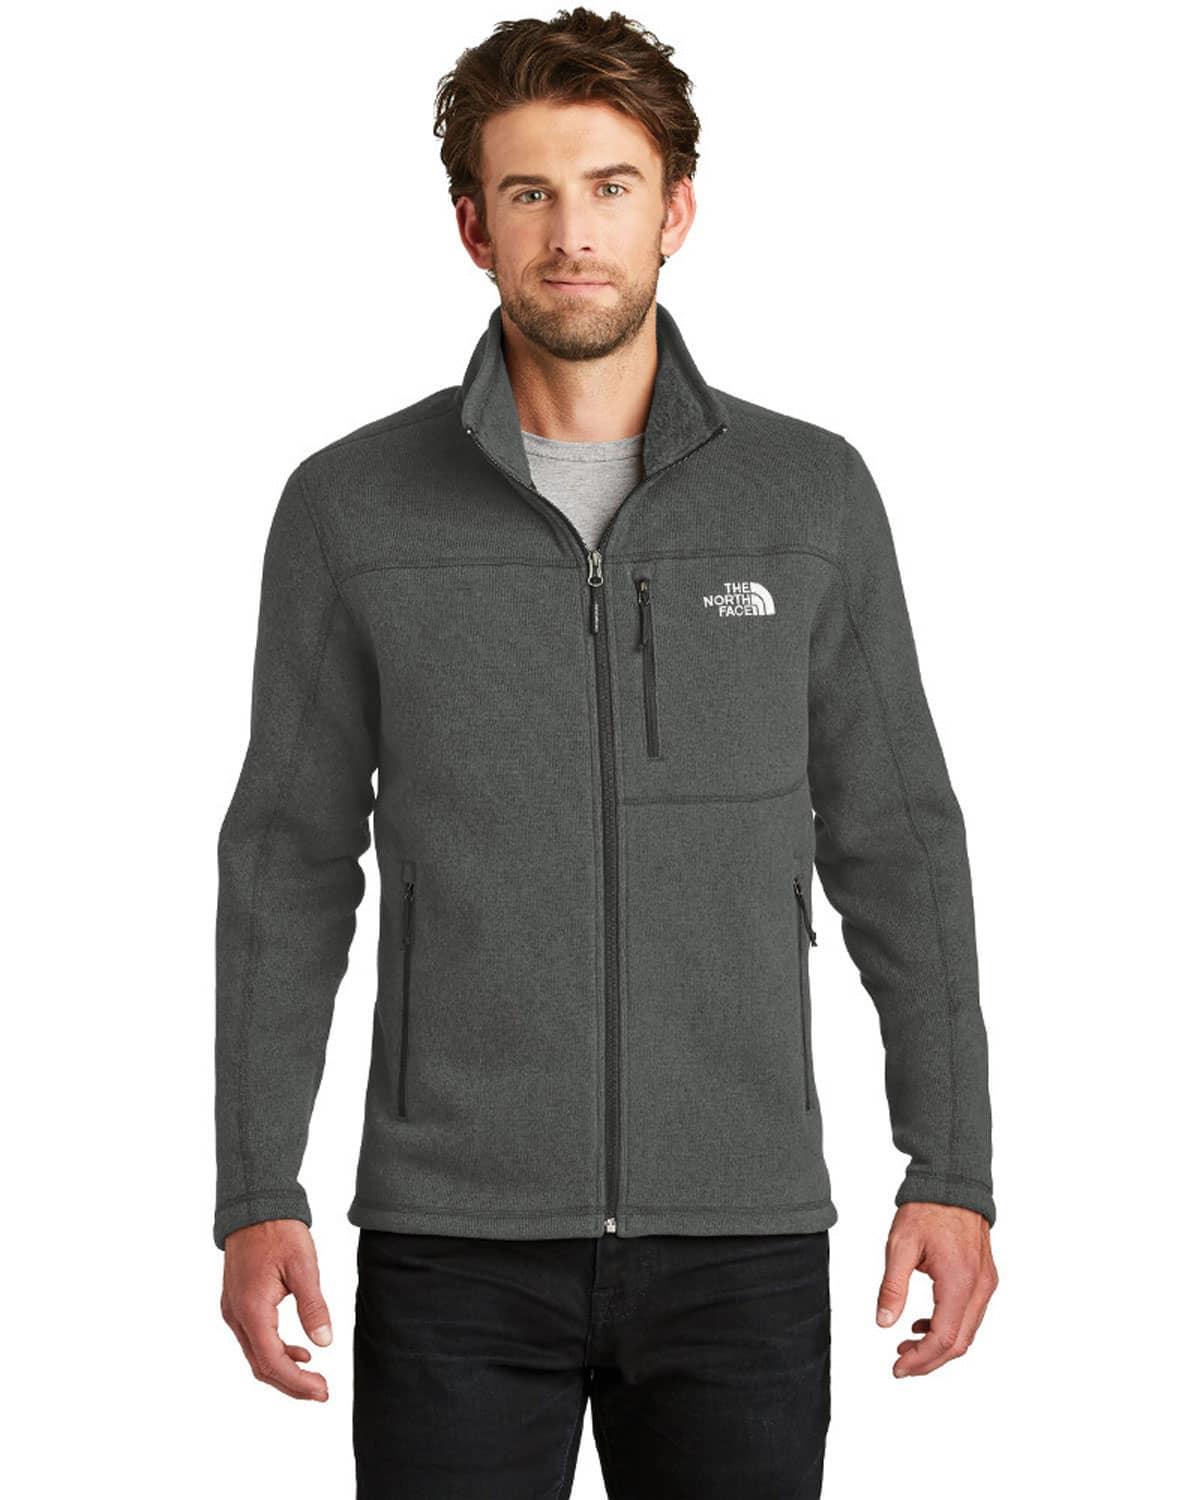 The North Face NF0A3LH7 Mens Jacket